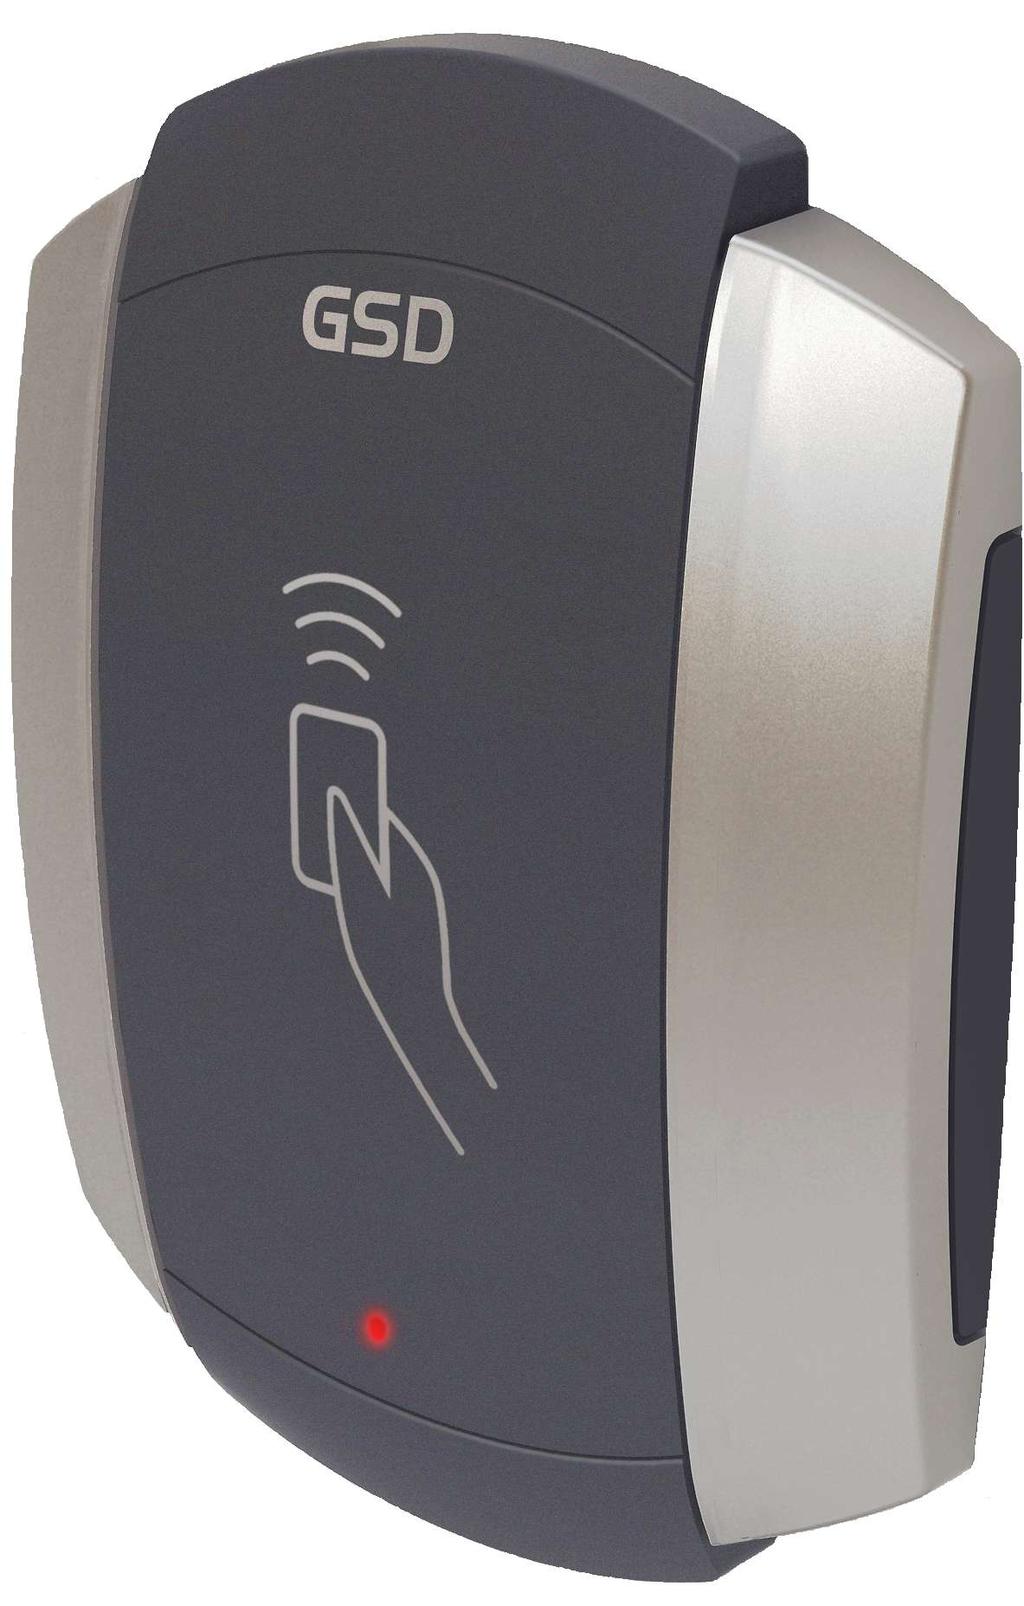 Other products from GSD standalone products GSD also offers fully functional standalone door controls for less complex door management.